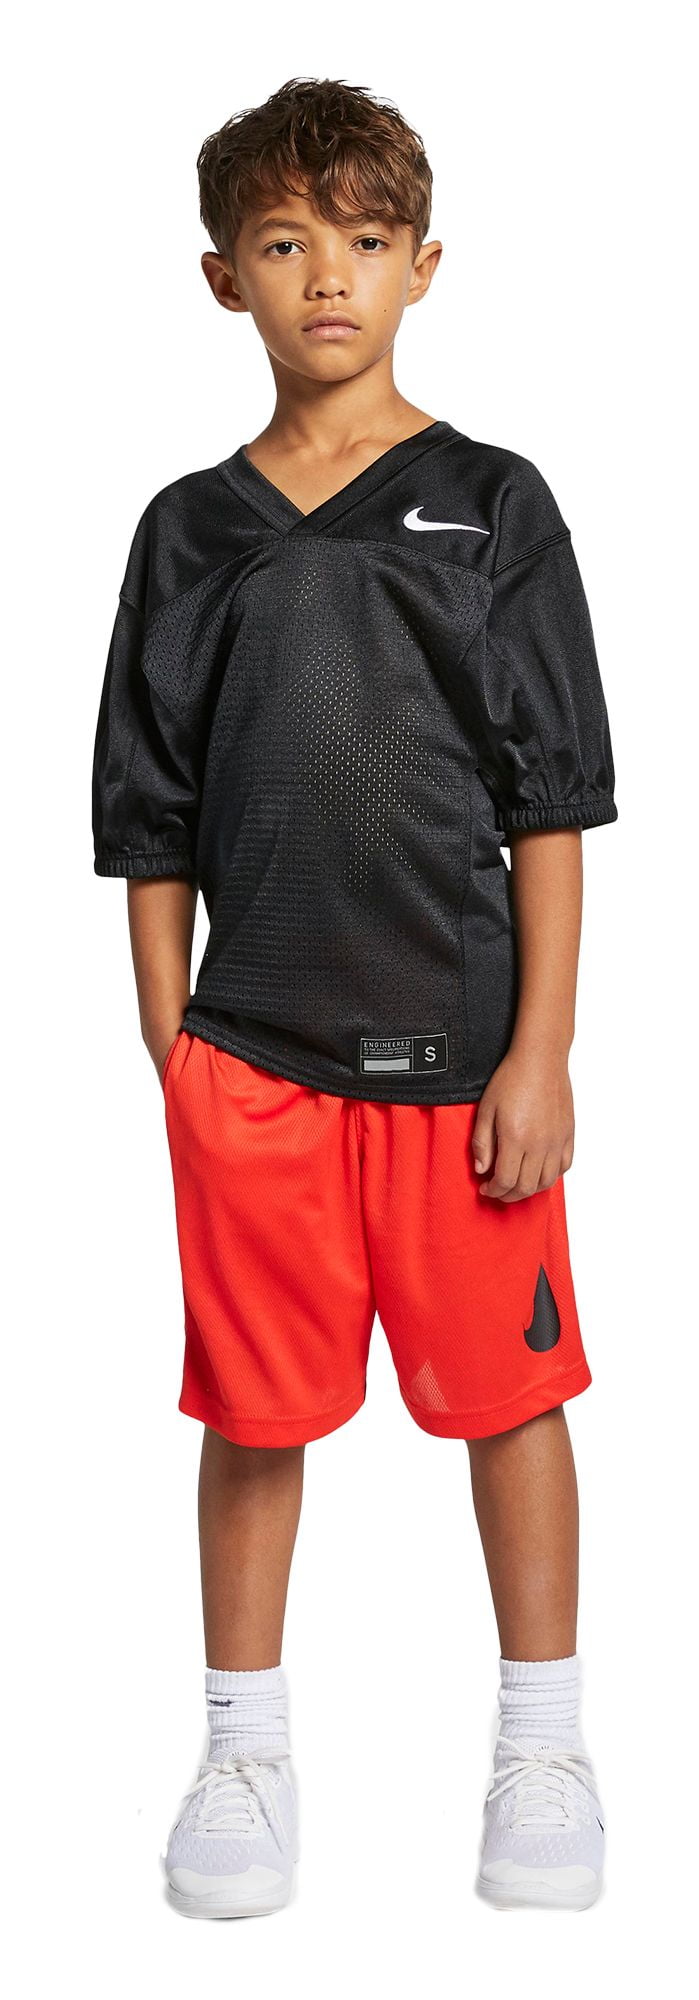 Nike Youth Recruit Practice Jersey